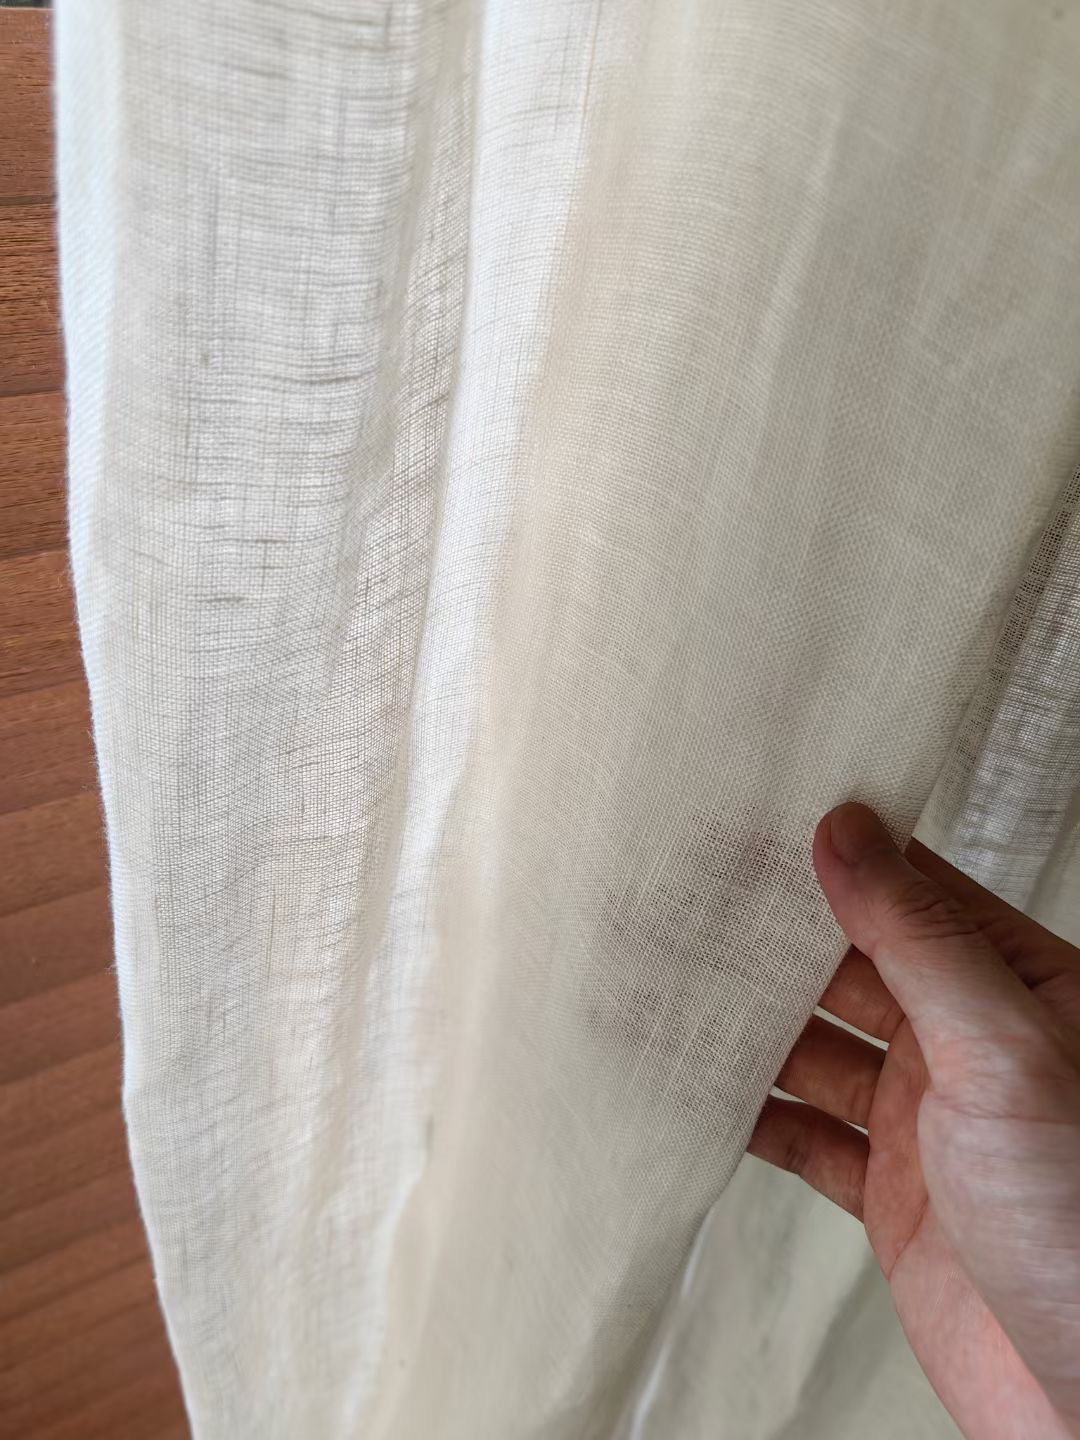 Close-up of hand holding French-imported white linen curtain, showcasing the natural weave and luxurious texture, ideal for sophisticated home decor